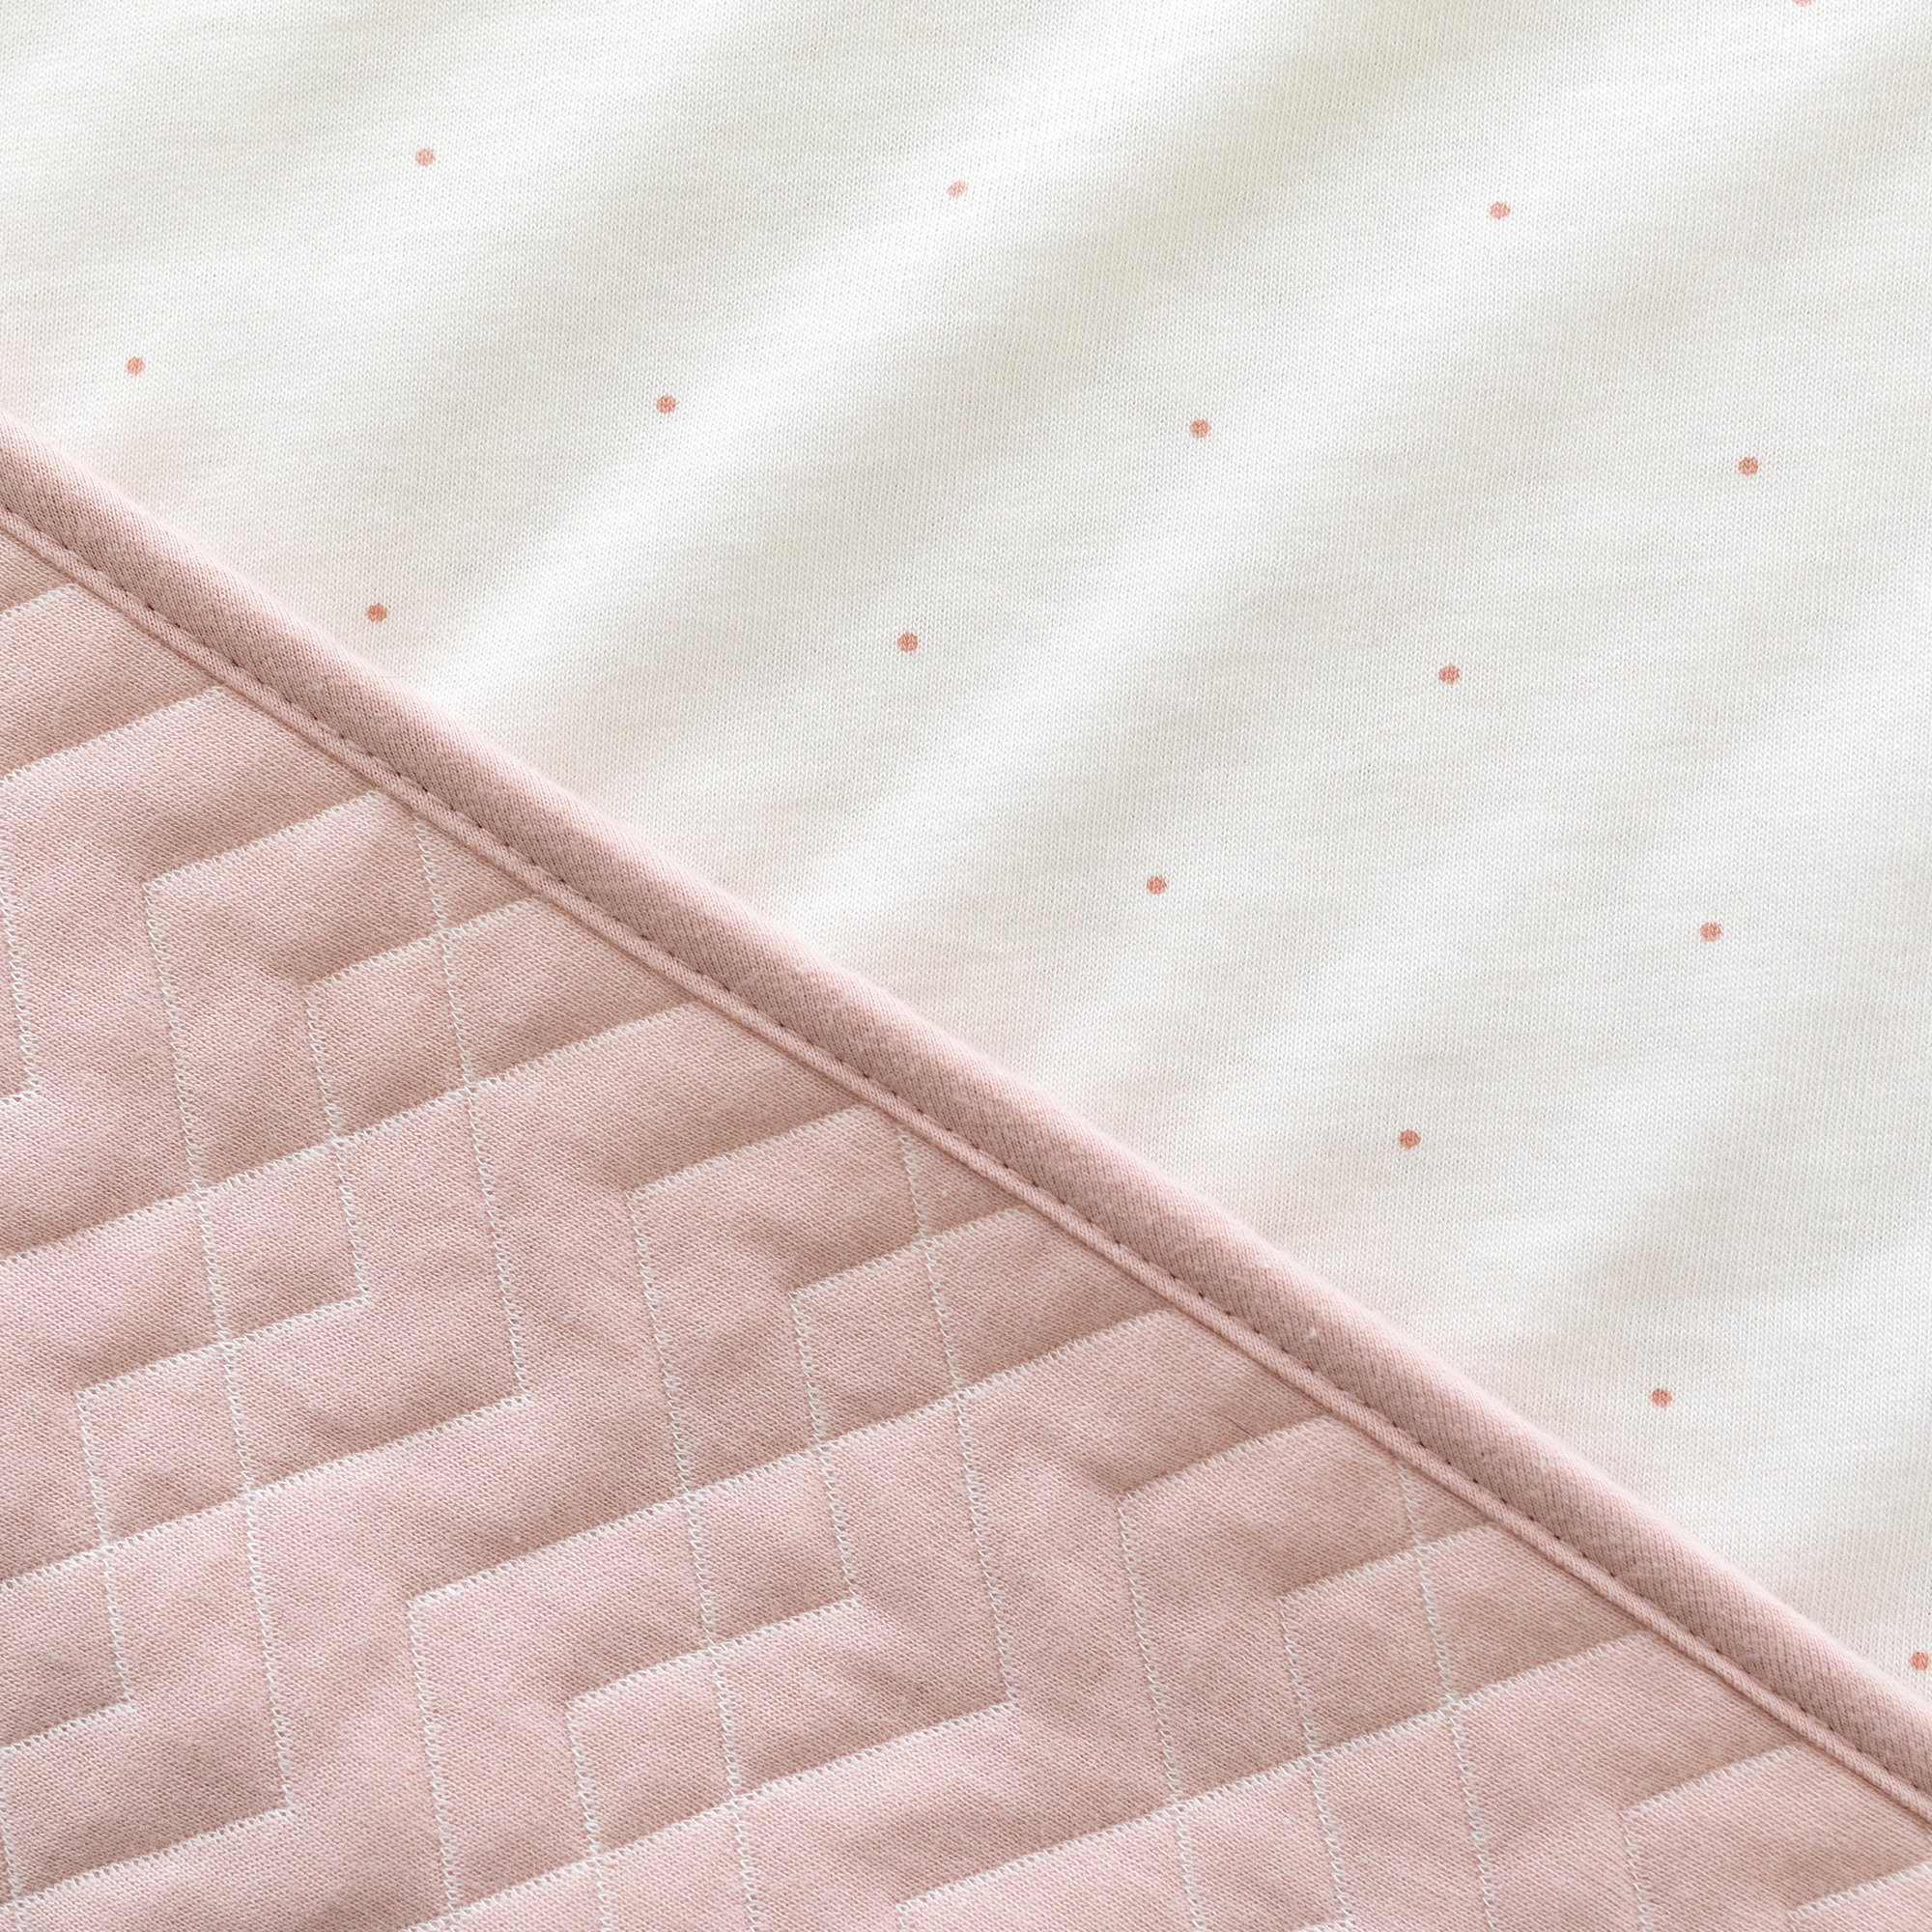 Blanket Quilted jersey + jersey 75x100cm OSAKA Blush tog 1.5